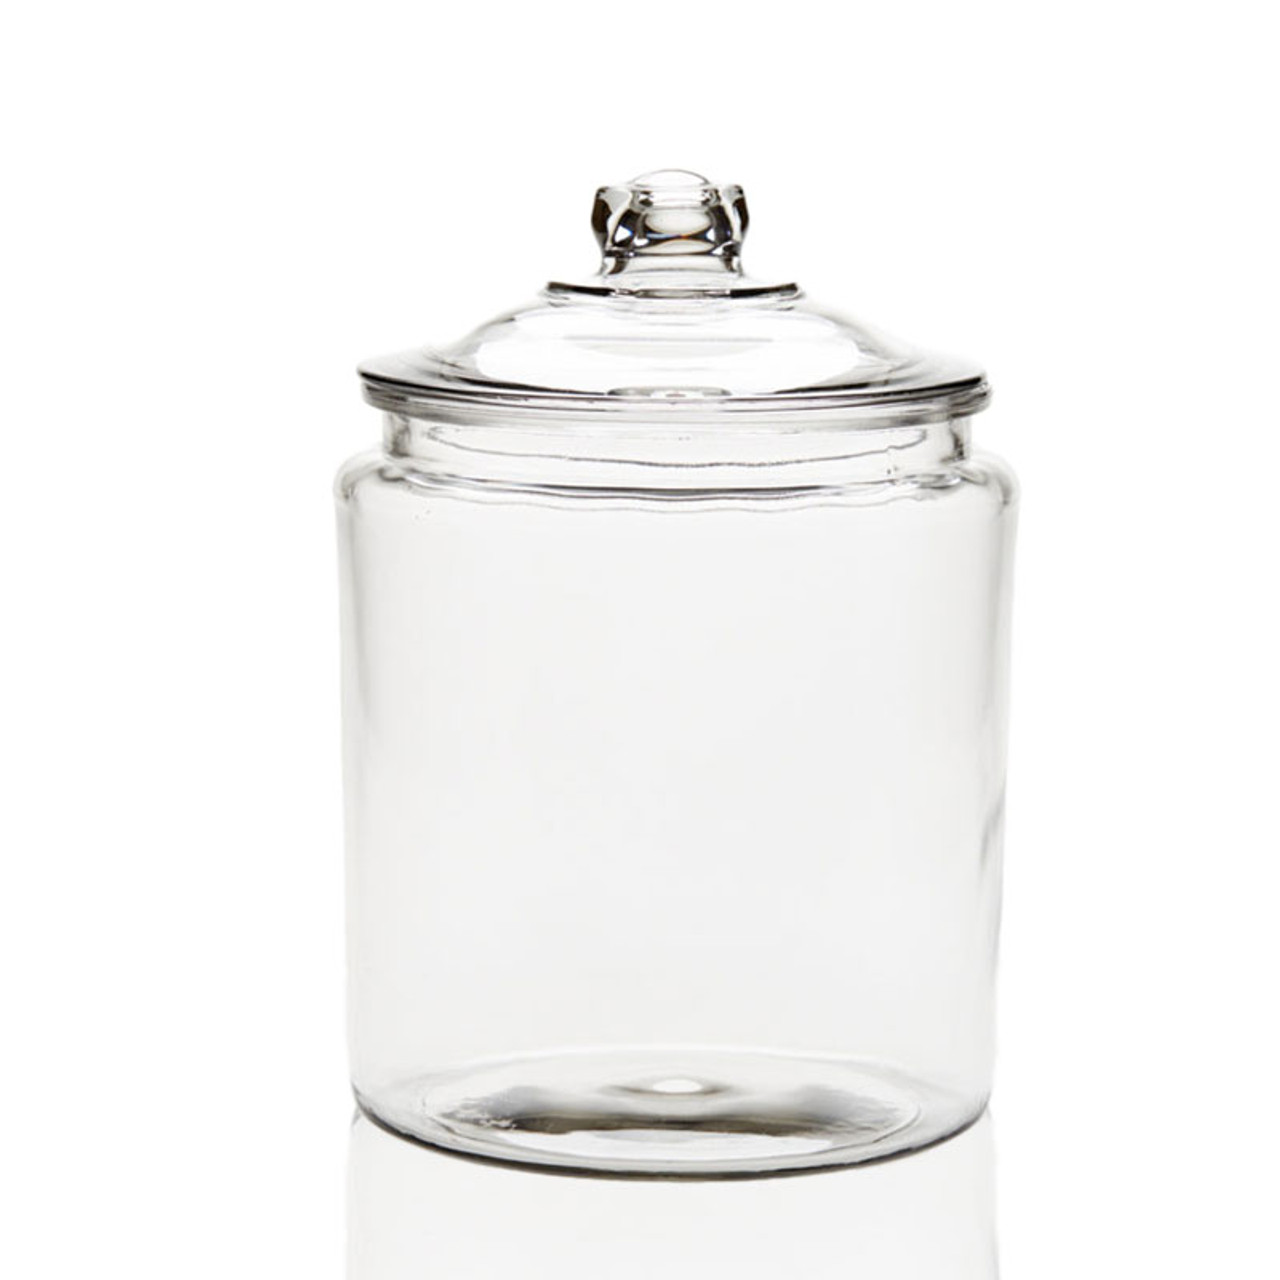 1-GALLON CLEAR Glass Large Jar Wide Mouth with Airtight Metal Lid For  Storing **